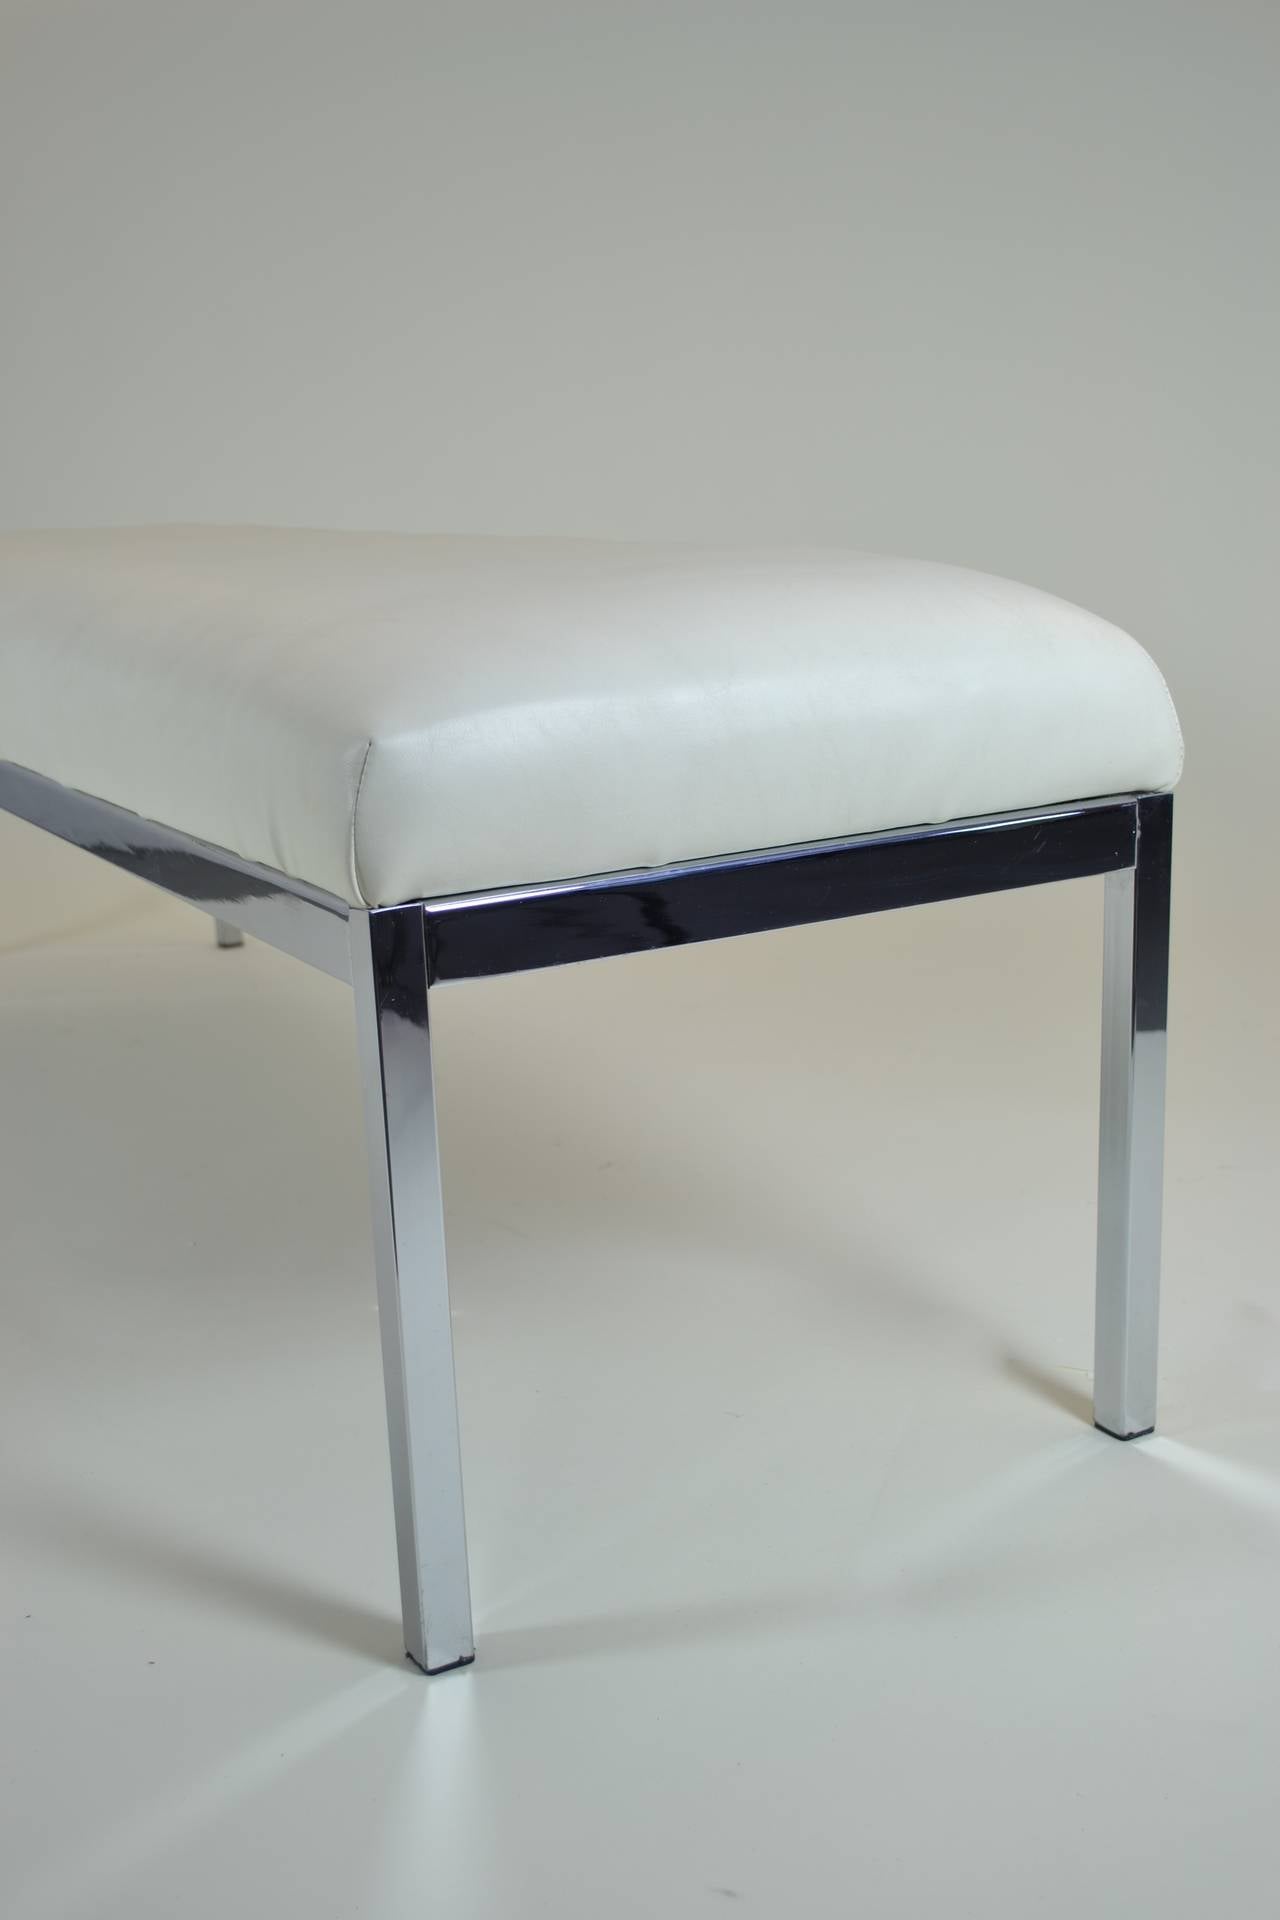 Simple chrome bench, upholstered in white vinyl. Nice proportions.